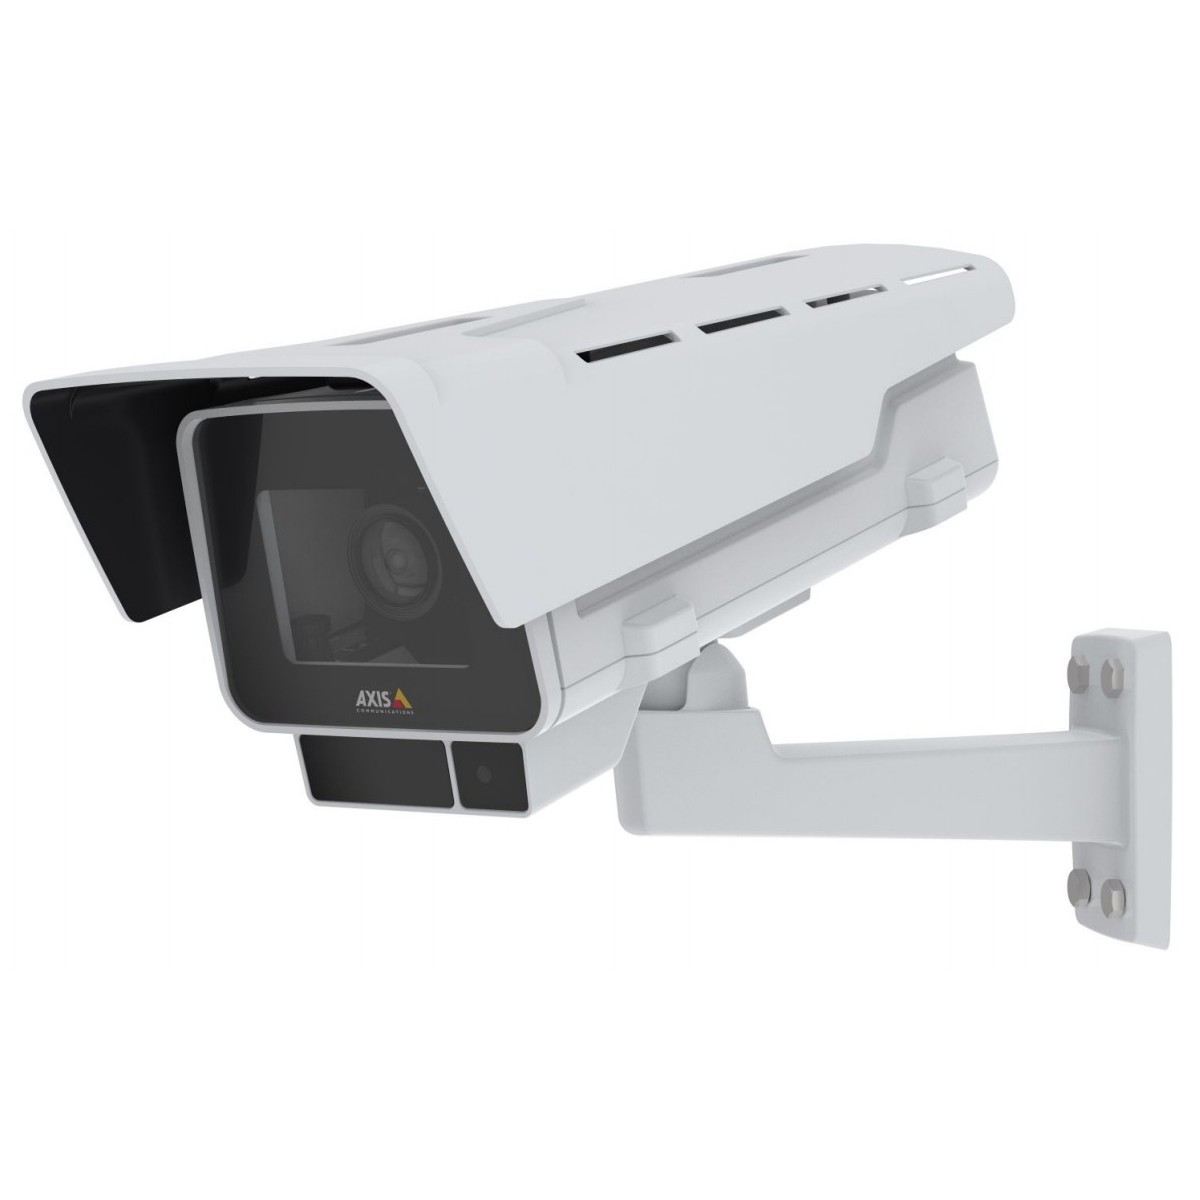 Axis P1375-E Barebone - IP security camera - Outdoor - Wired - Digital PTZ - PELCO-D - Simplified Chinese - Traditional Chinese 